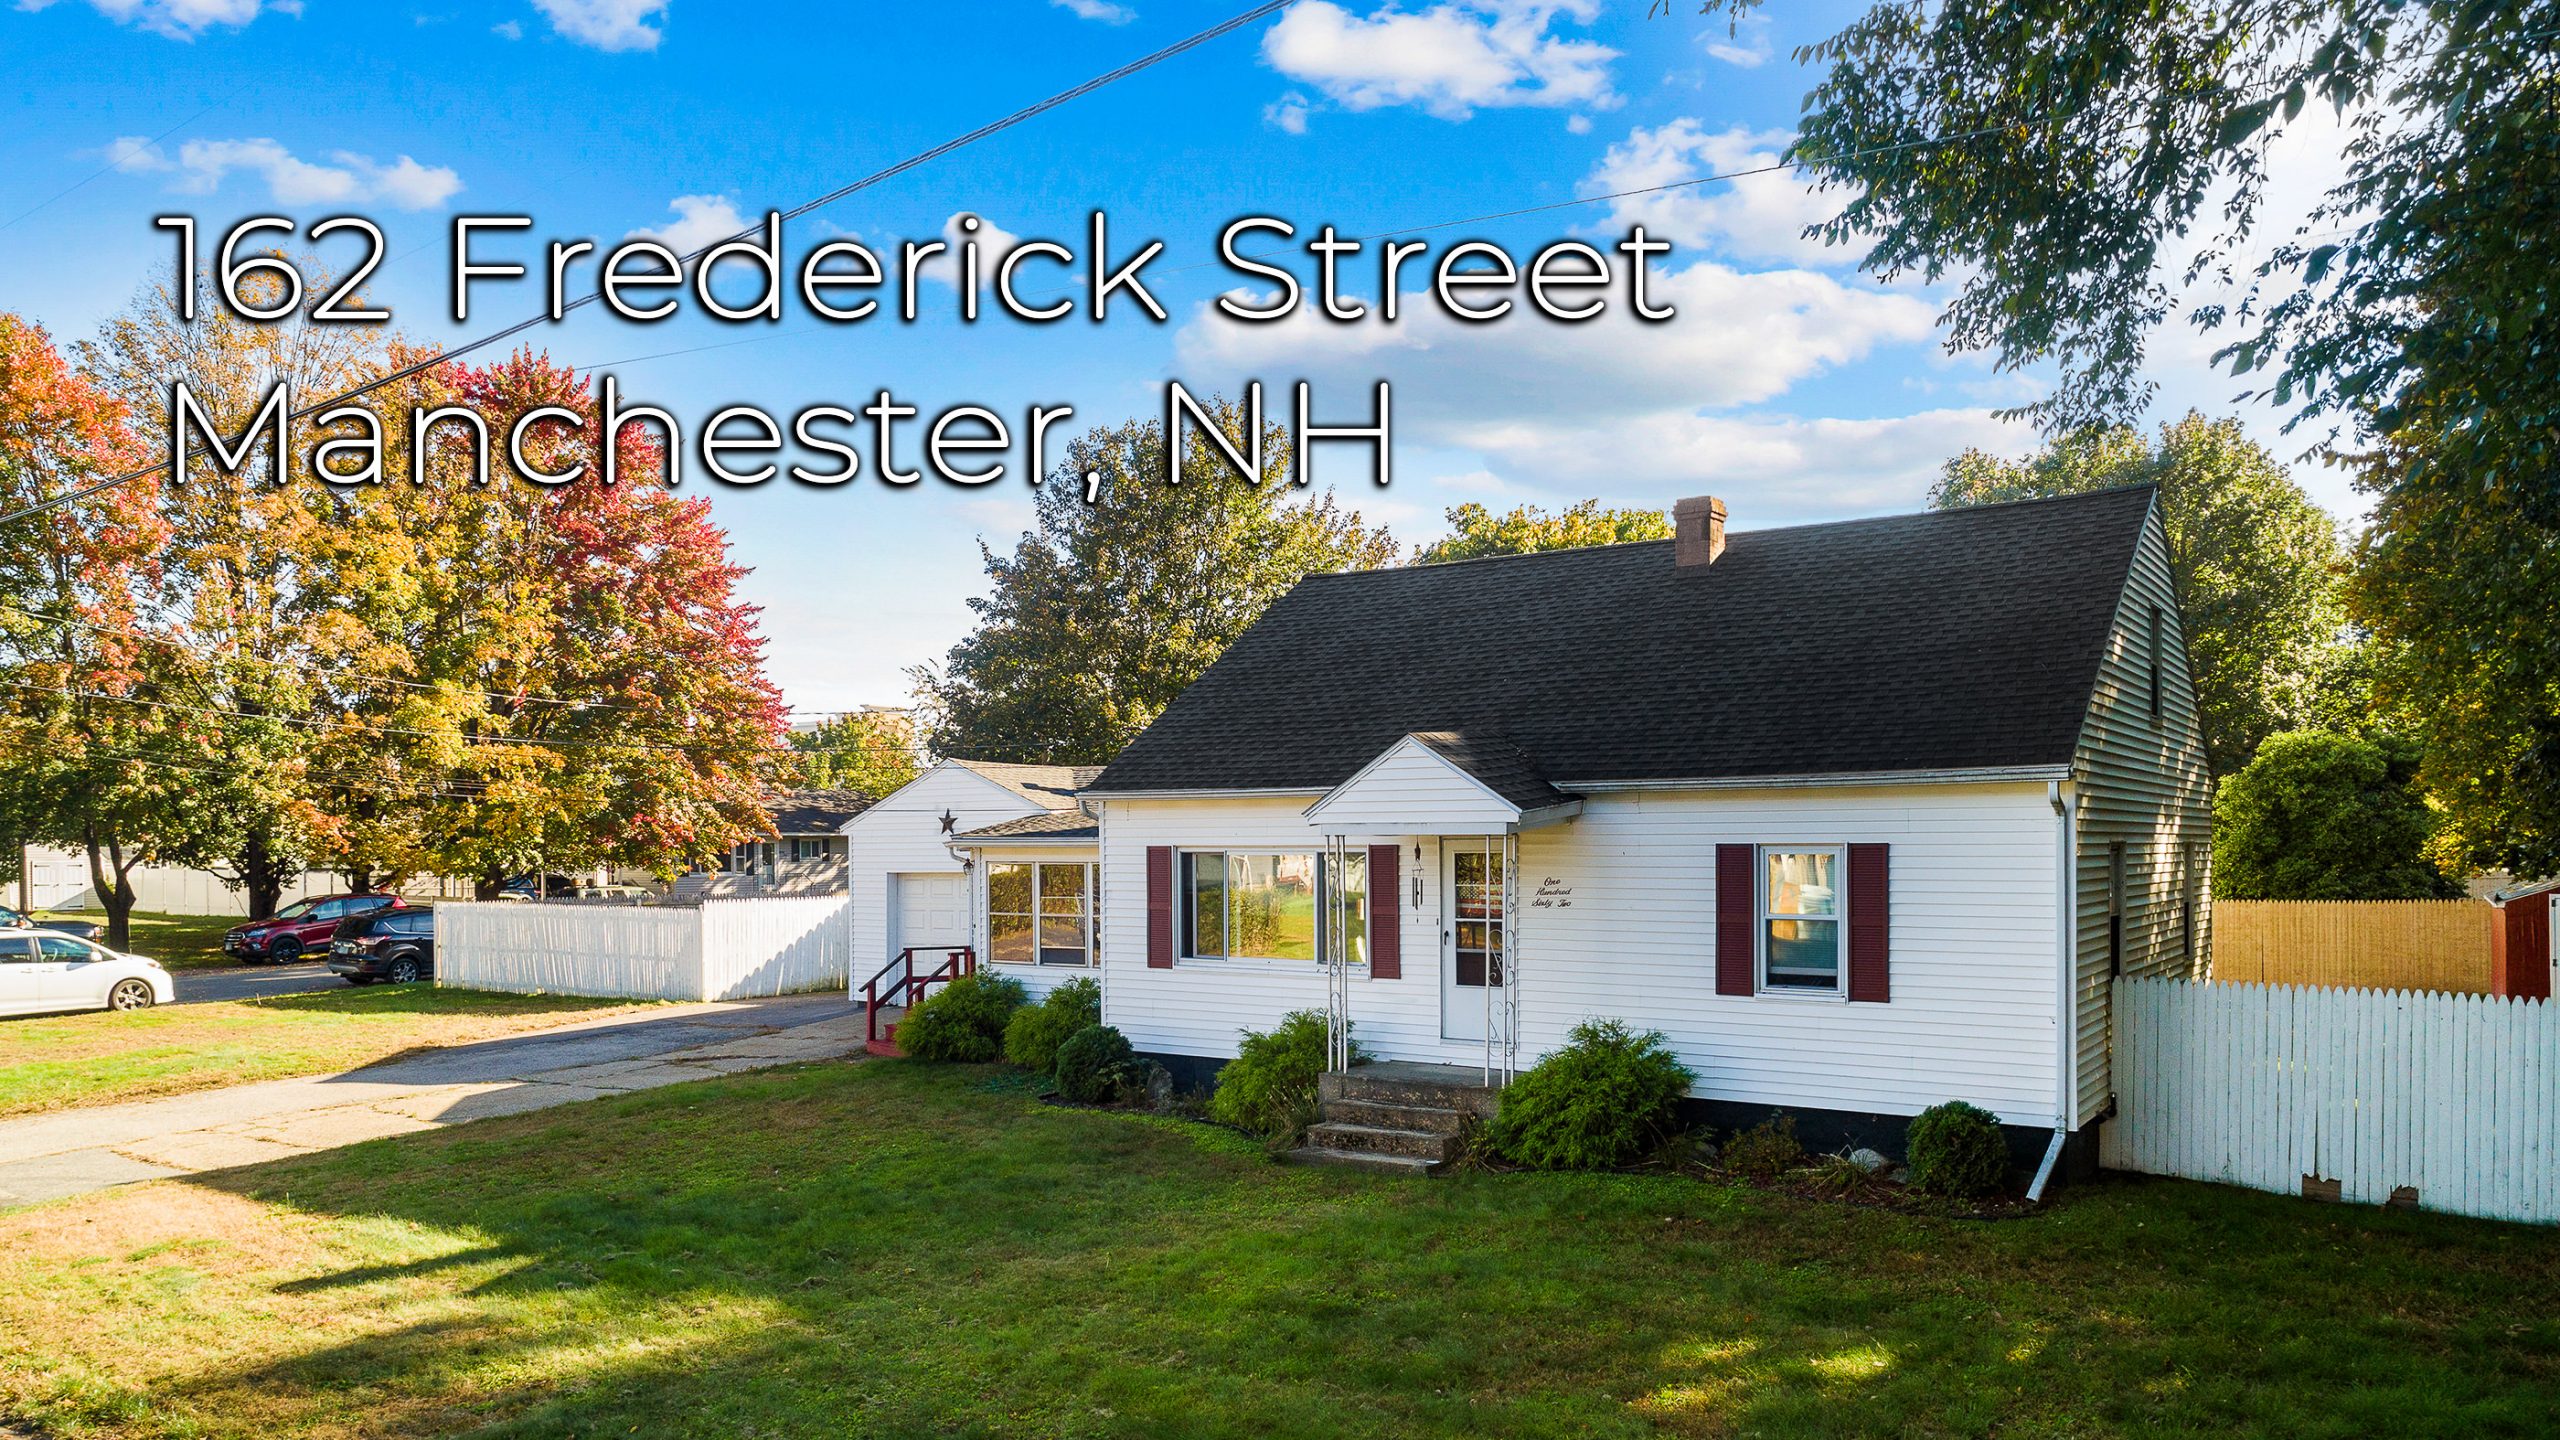 162 Frederick St Manchester NH 03102